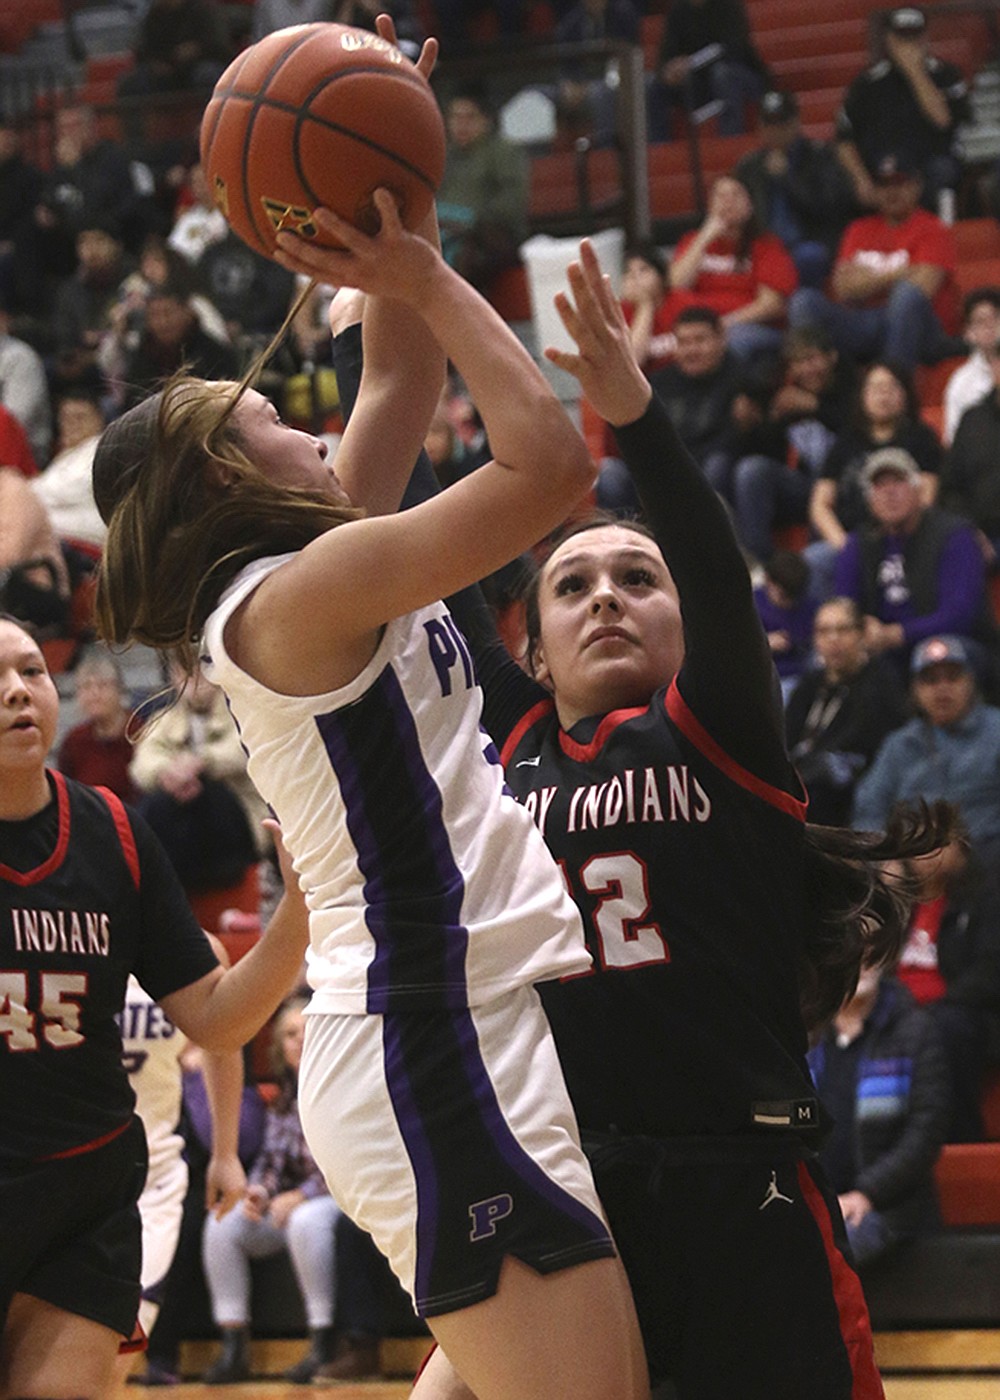 Polson's Julia Barnard, who returns to the Lady Pirates as a senior, goes up for two points against Browning during last winter's Class A Divisional Tourney in Ronan. (Bob Gunderson photo)